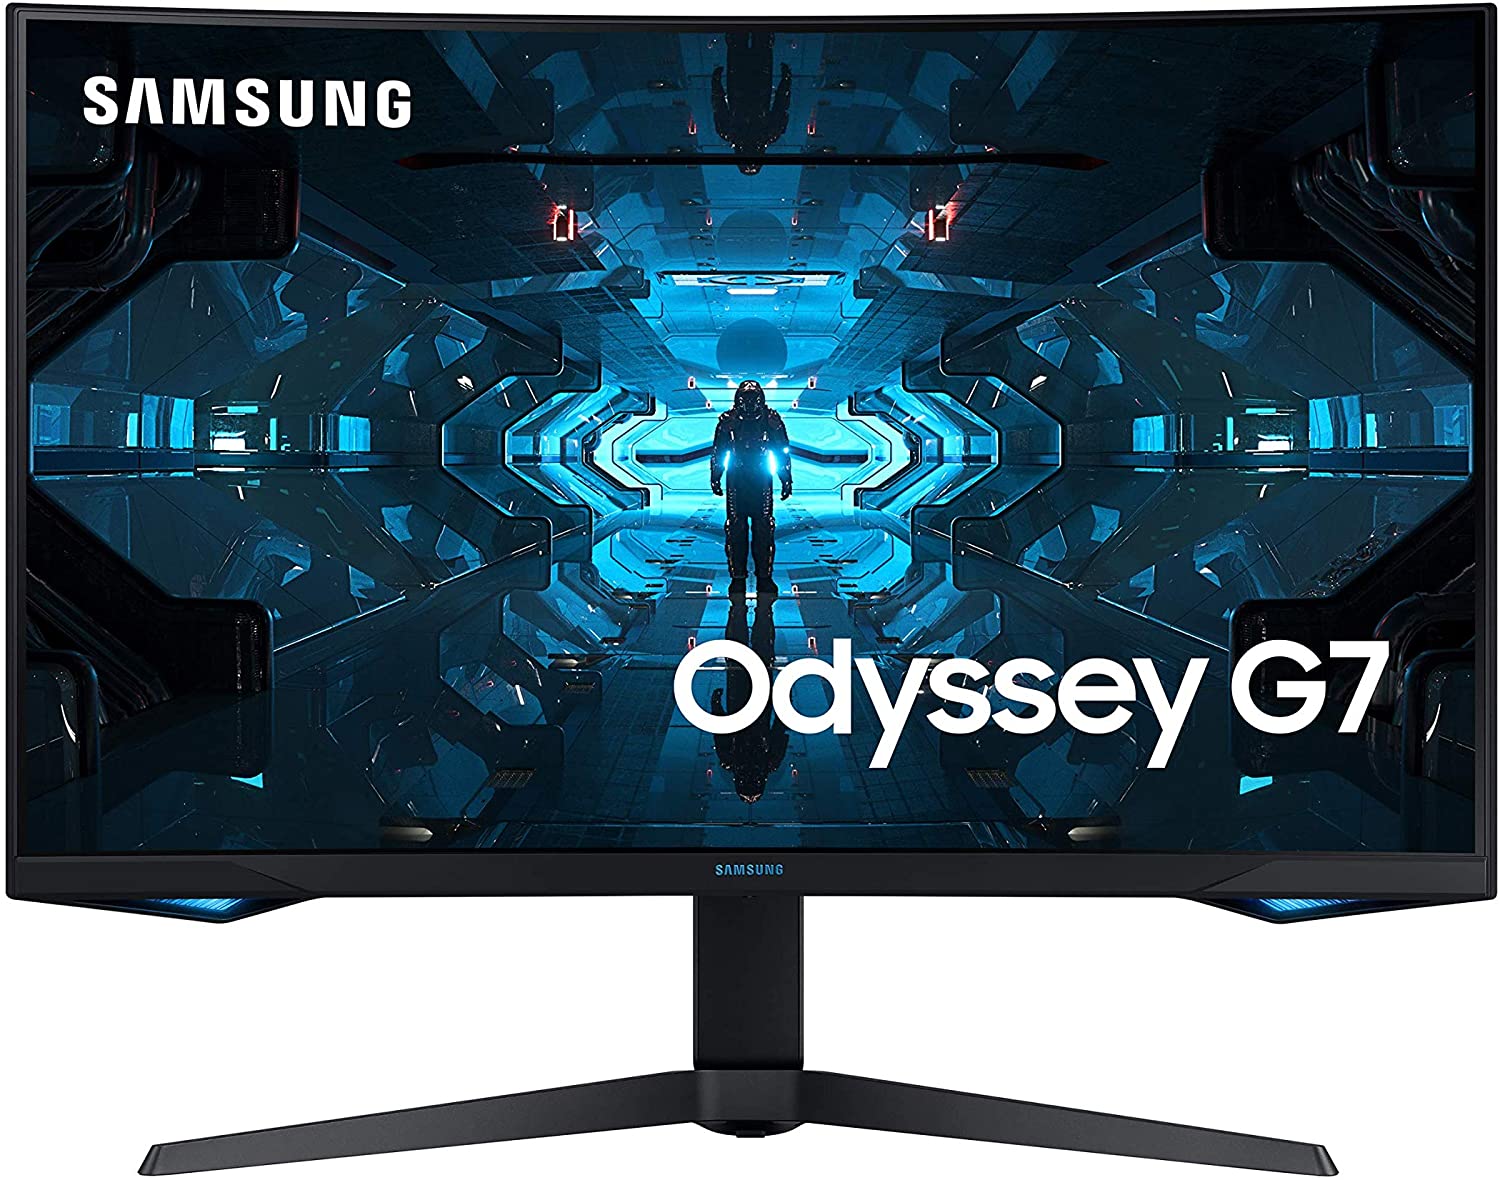 Samsung Odyssey G7 Curved Gaming Monitor